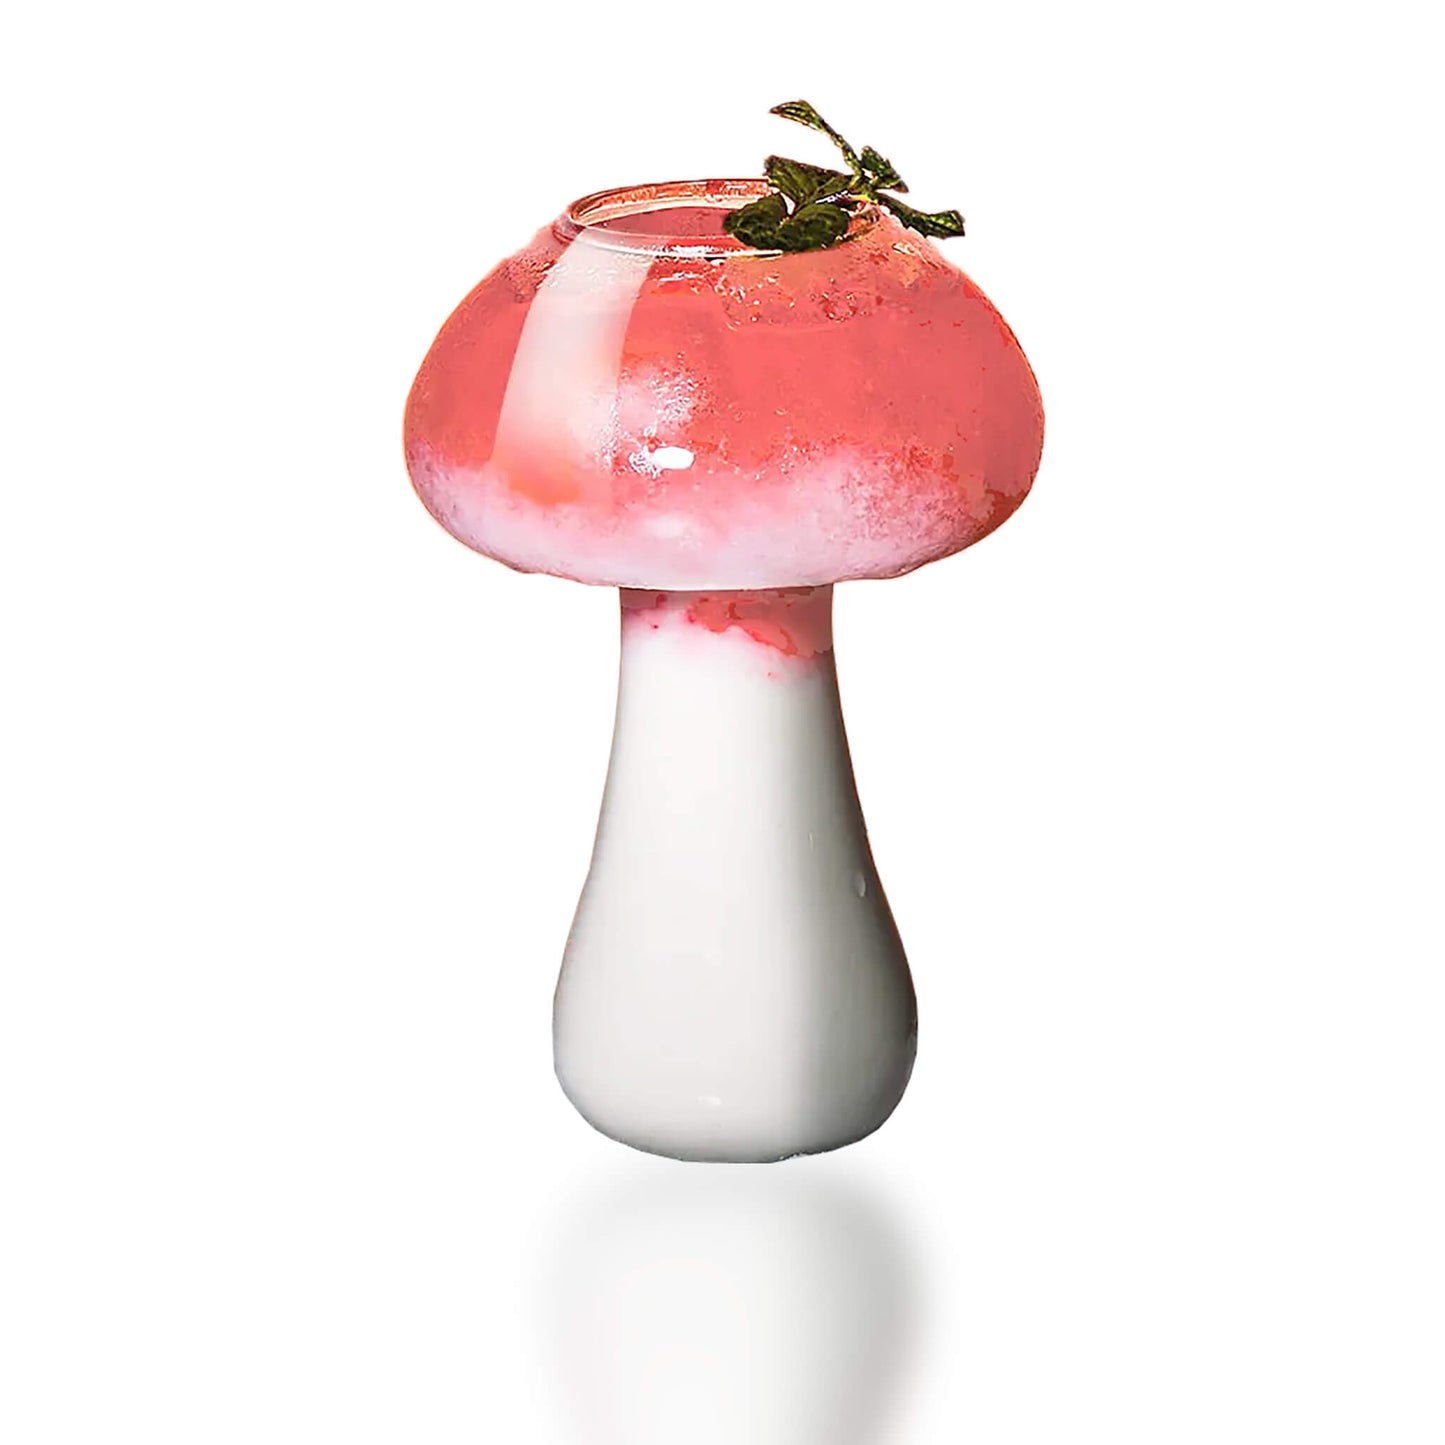 Mushroom Design Glass: For your cool friend